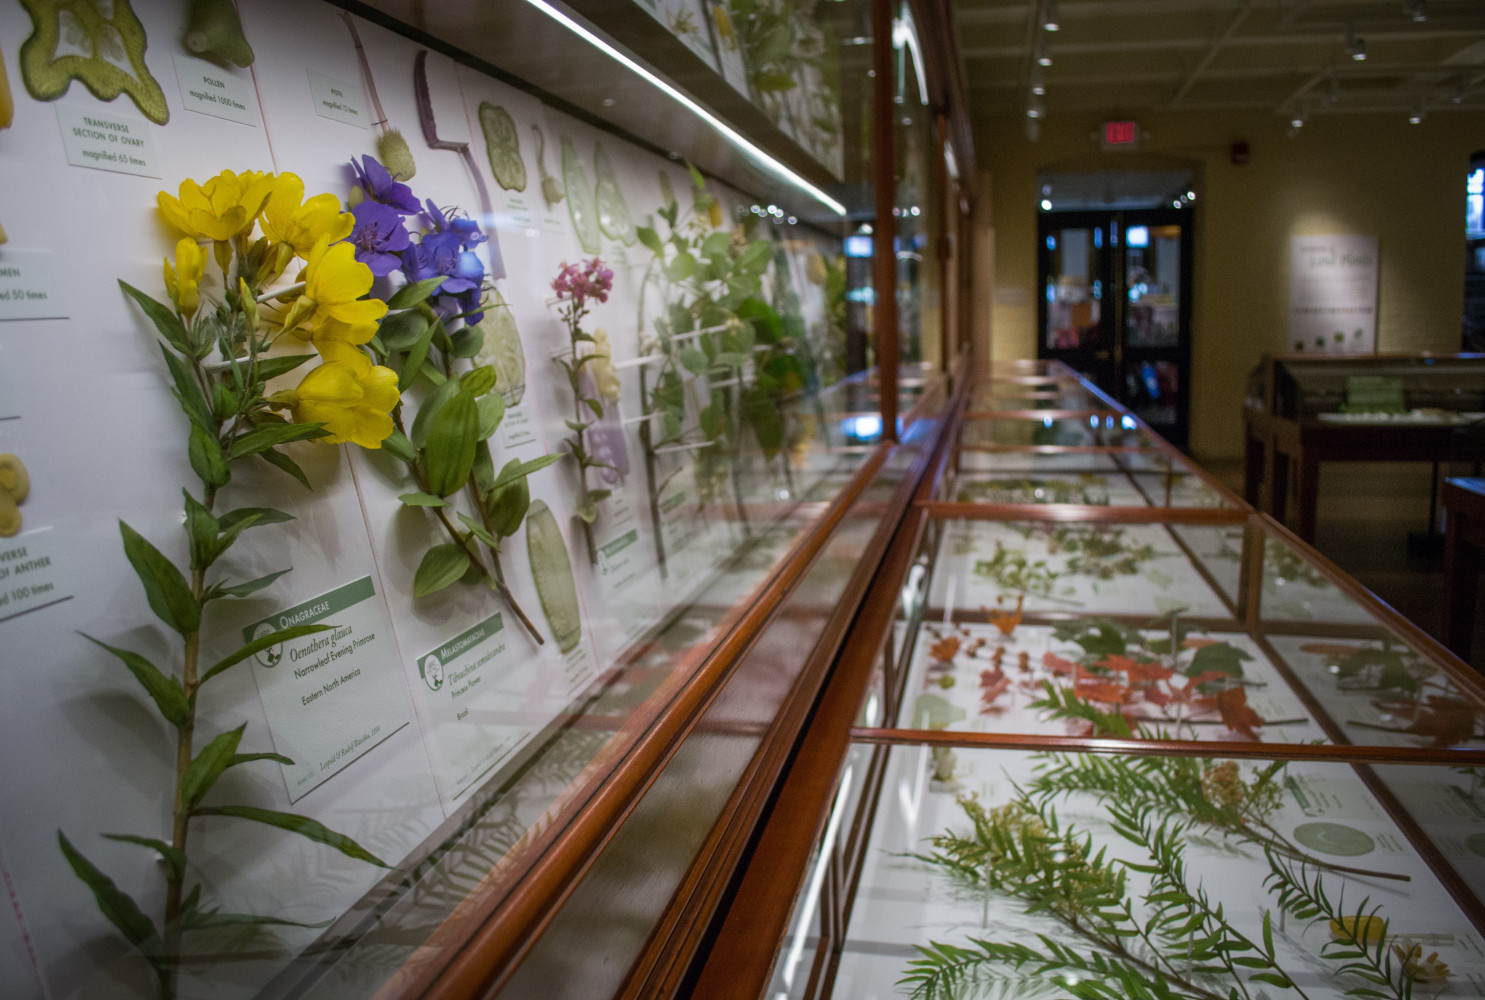 The Ware Collection of Blaschka Glass Models of Plants, Harvard University Herbaria / Harvard Museum of Natural History © President and Fellows of Harvard College